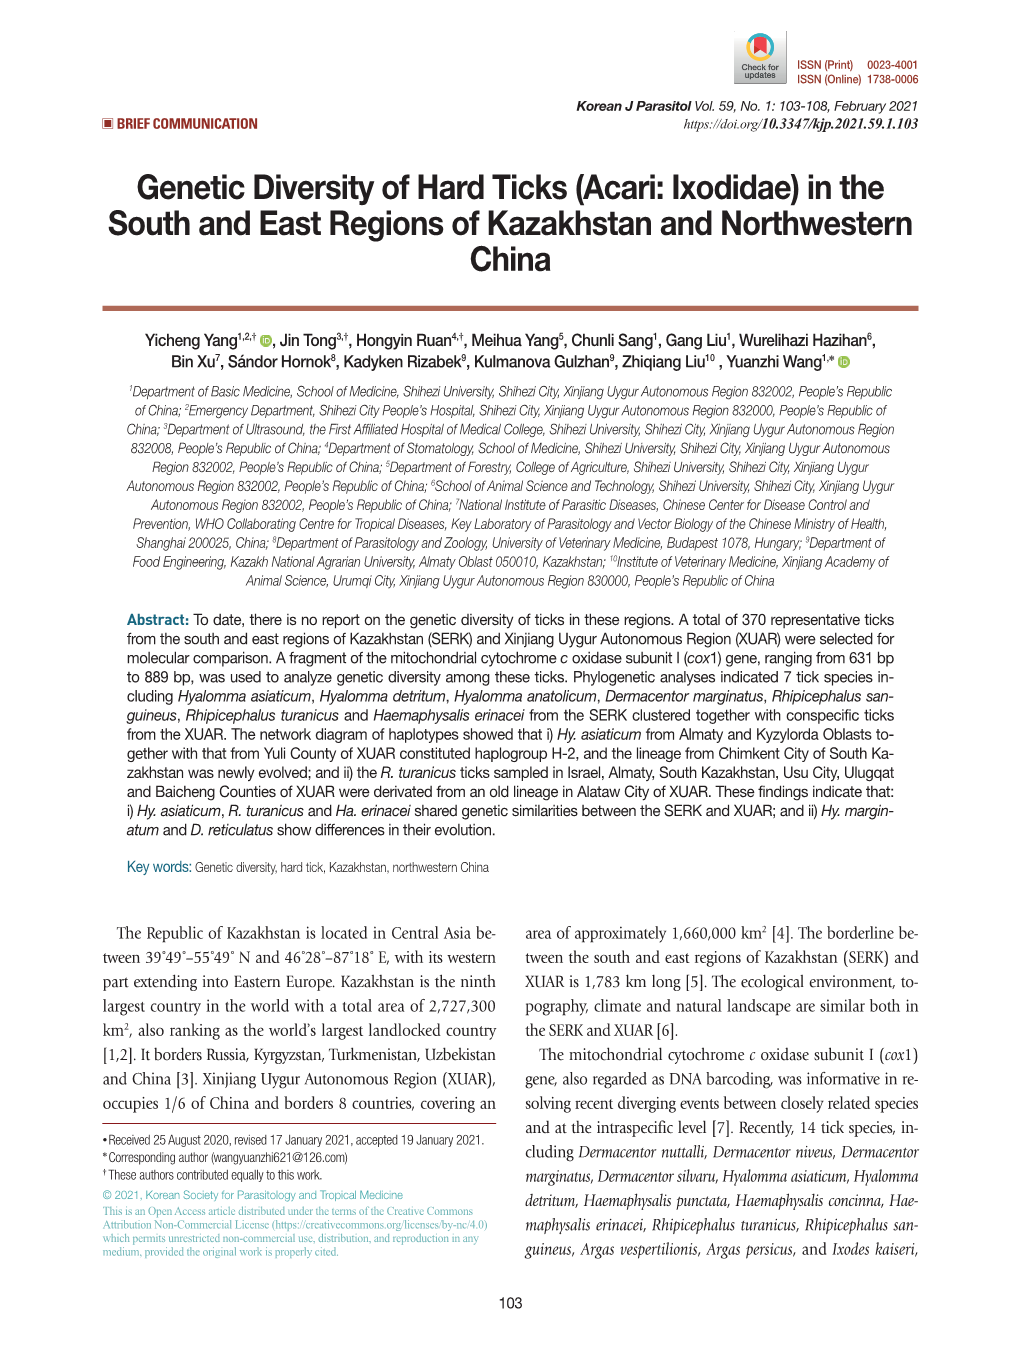 Genetic Diversity of Hard Ticks (Acari: Ixodidae) in the South and East Regions of Kazakhstan and Northwestern China